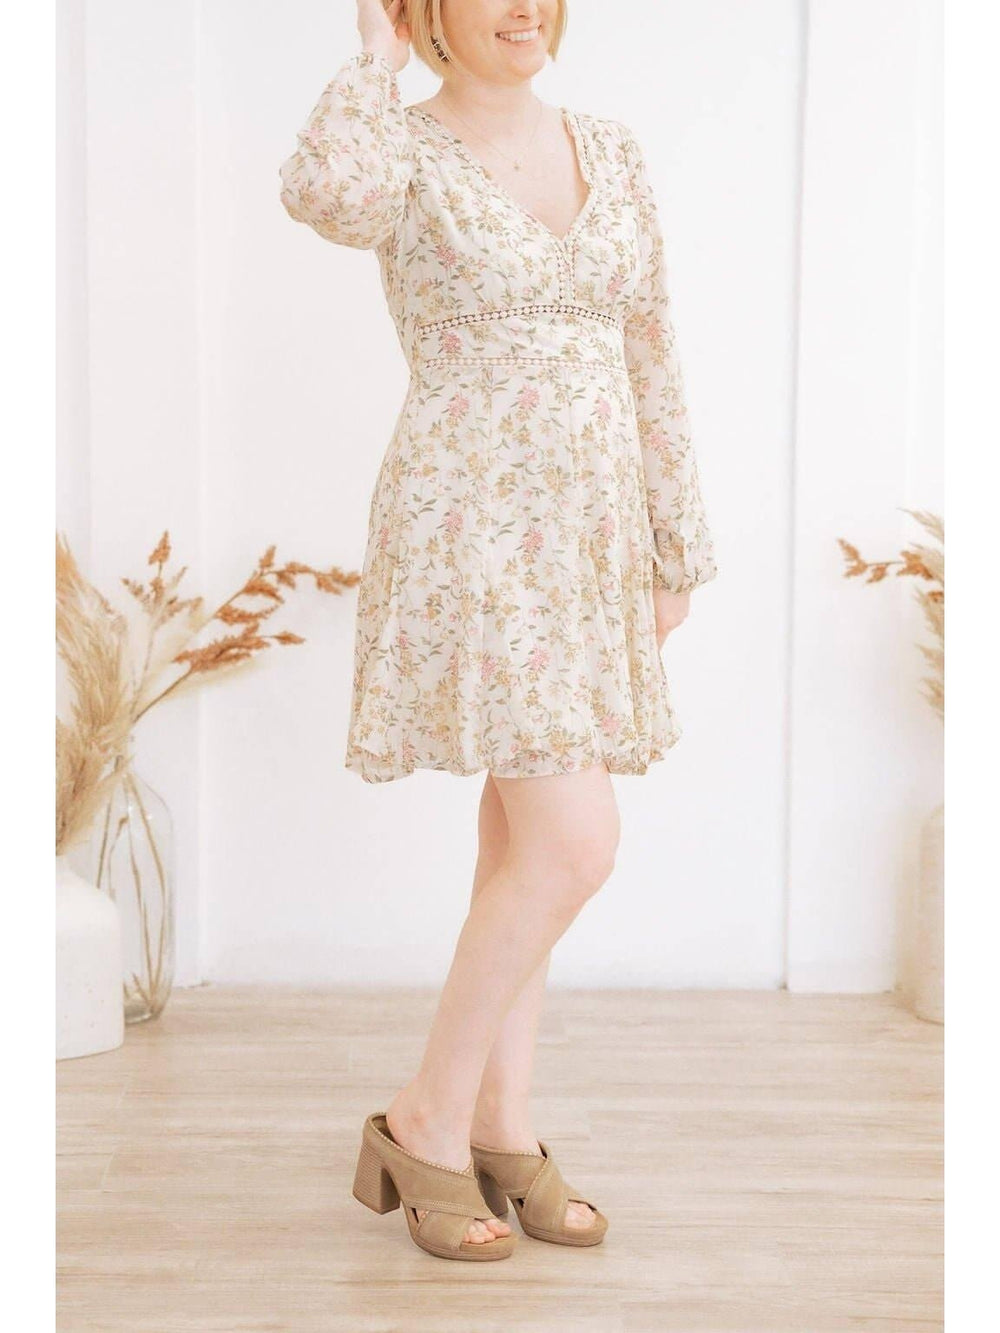 Long Sleeve Floral Dress with Back Smocking - Lolo Viv Boutique